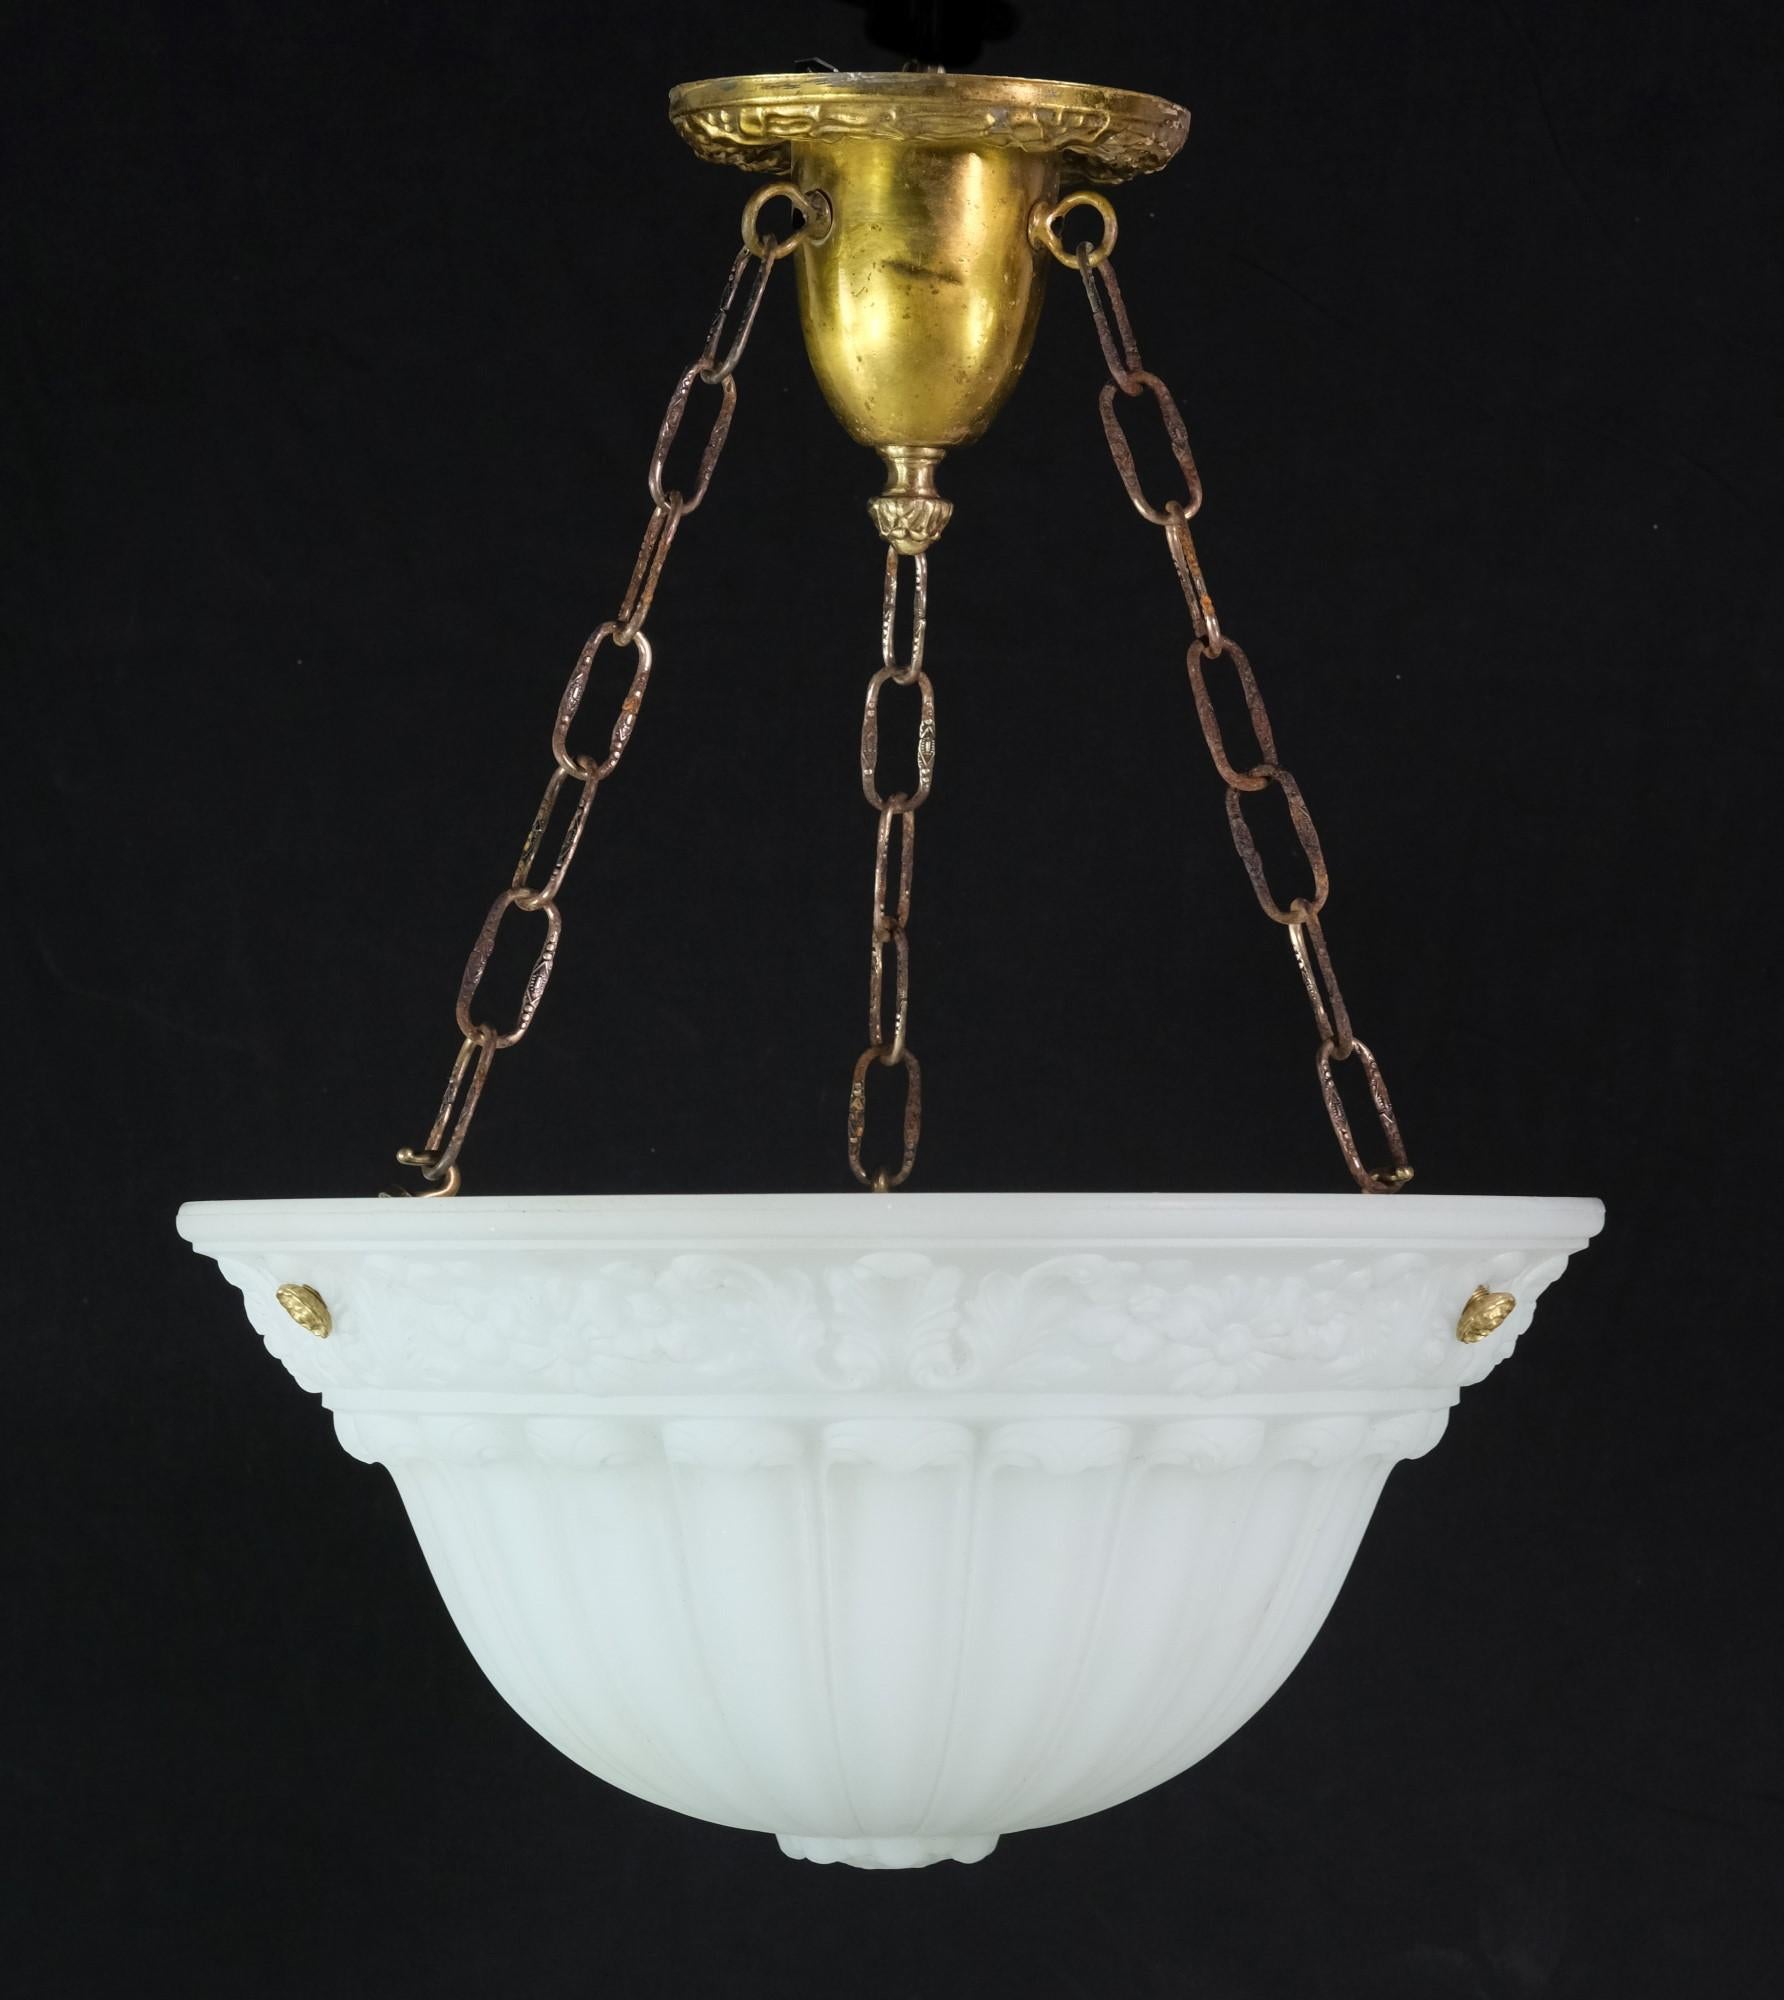 Antique pendant dish light with heavy milk glass bowl supported by brass canopy with brass plated steel chains. The white bowl has an elegant cast floral design which is complimented by a canopy with foliage details and three chains with brass